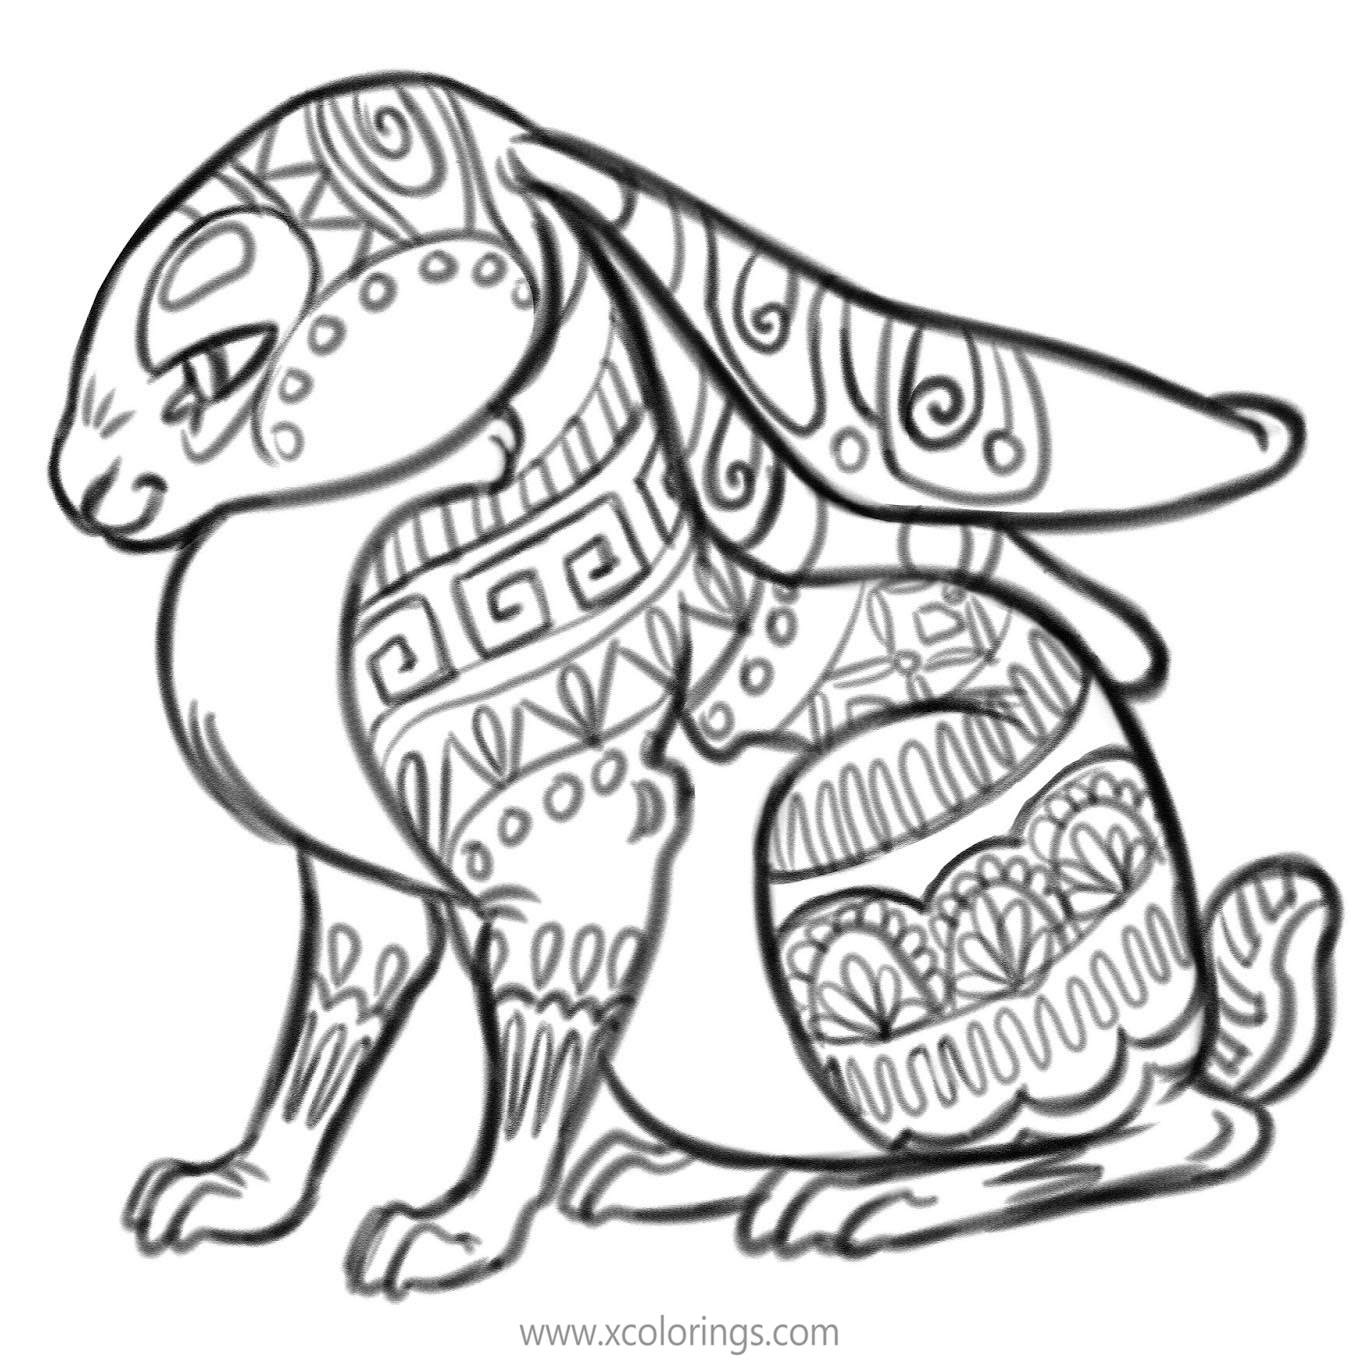 Printable Alebrijes Coloring Pages Printable Word Searches